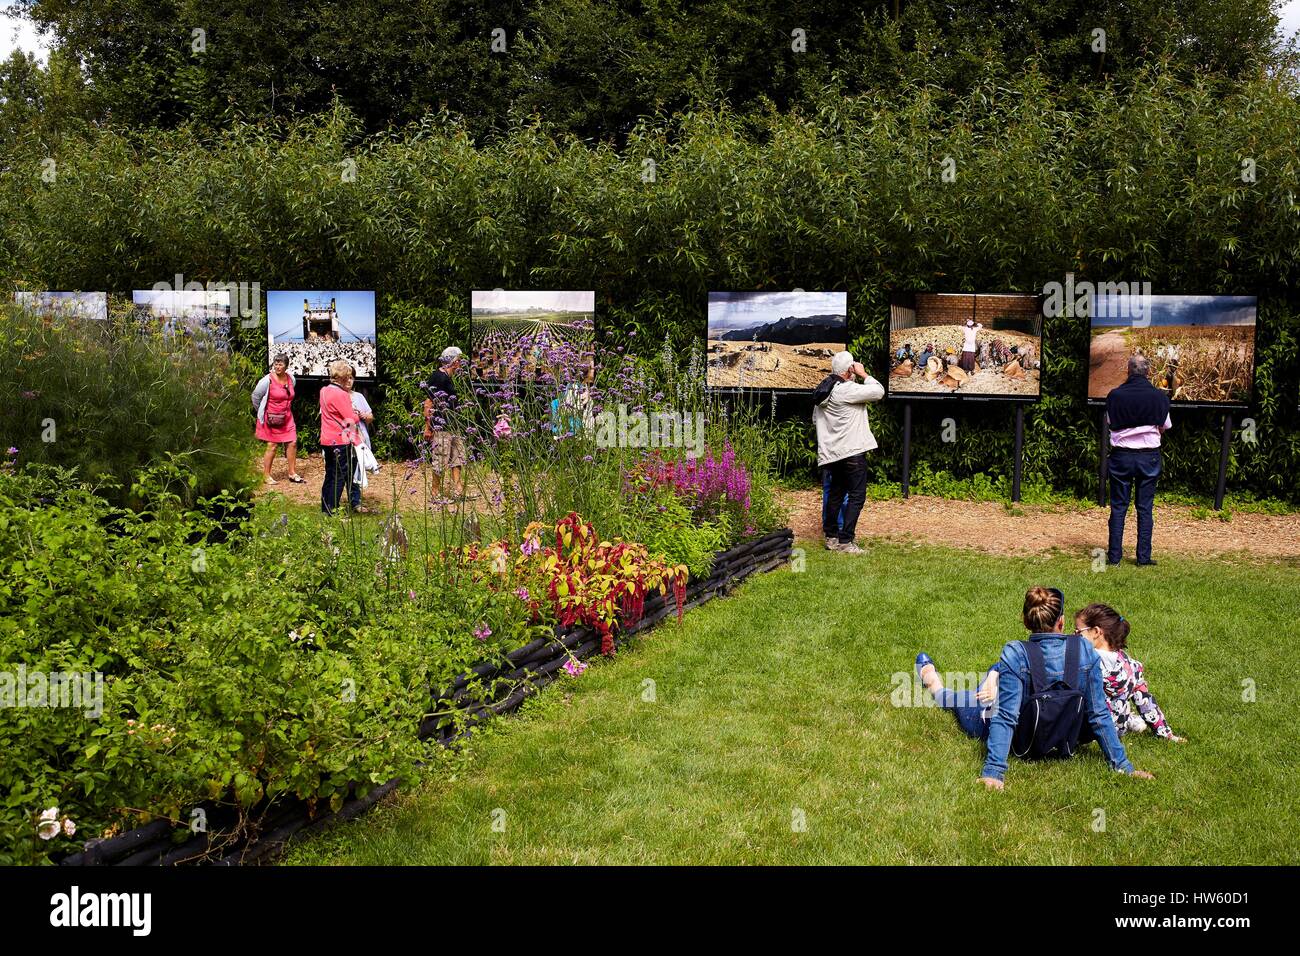 France, Morbihan, La Gacilly, Annual Photographic Festival: People and  Nature, Outdoor photography exhibition Stock Photo - Alamy